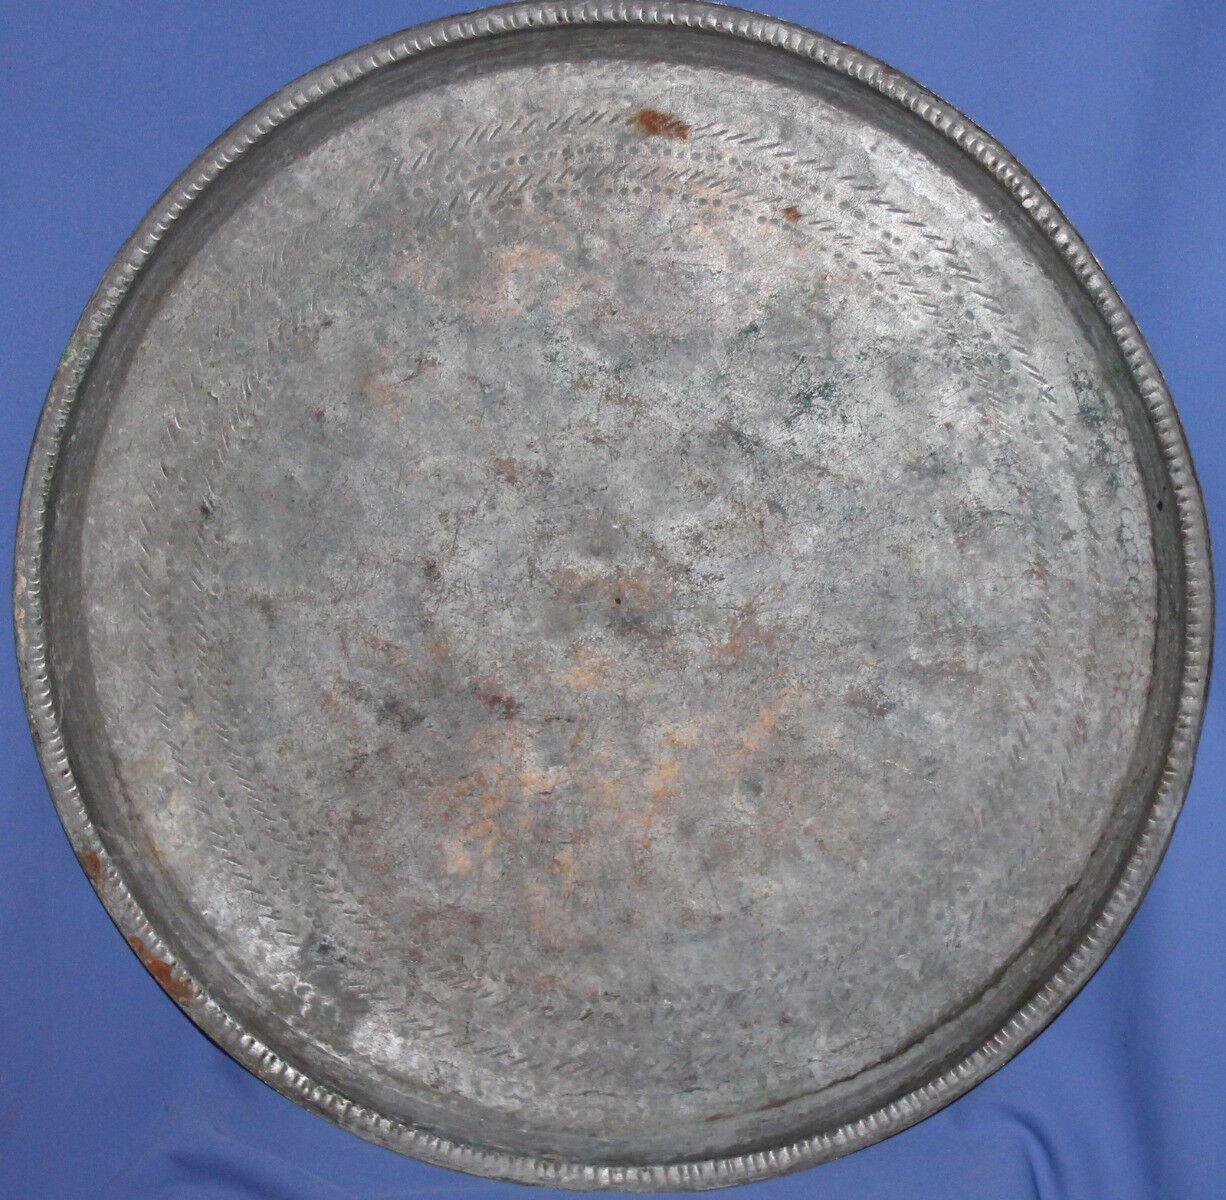 Antique 19c hand made large tinned copper baking dish platter